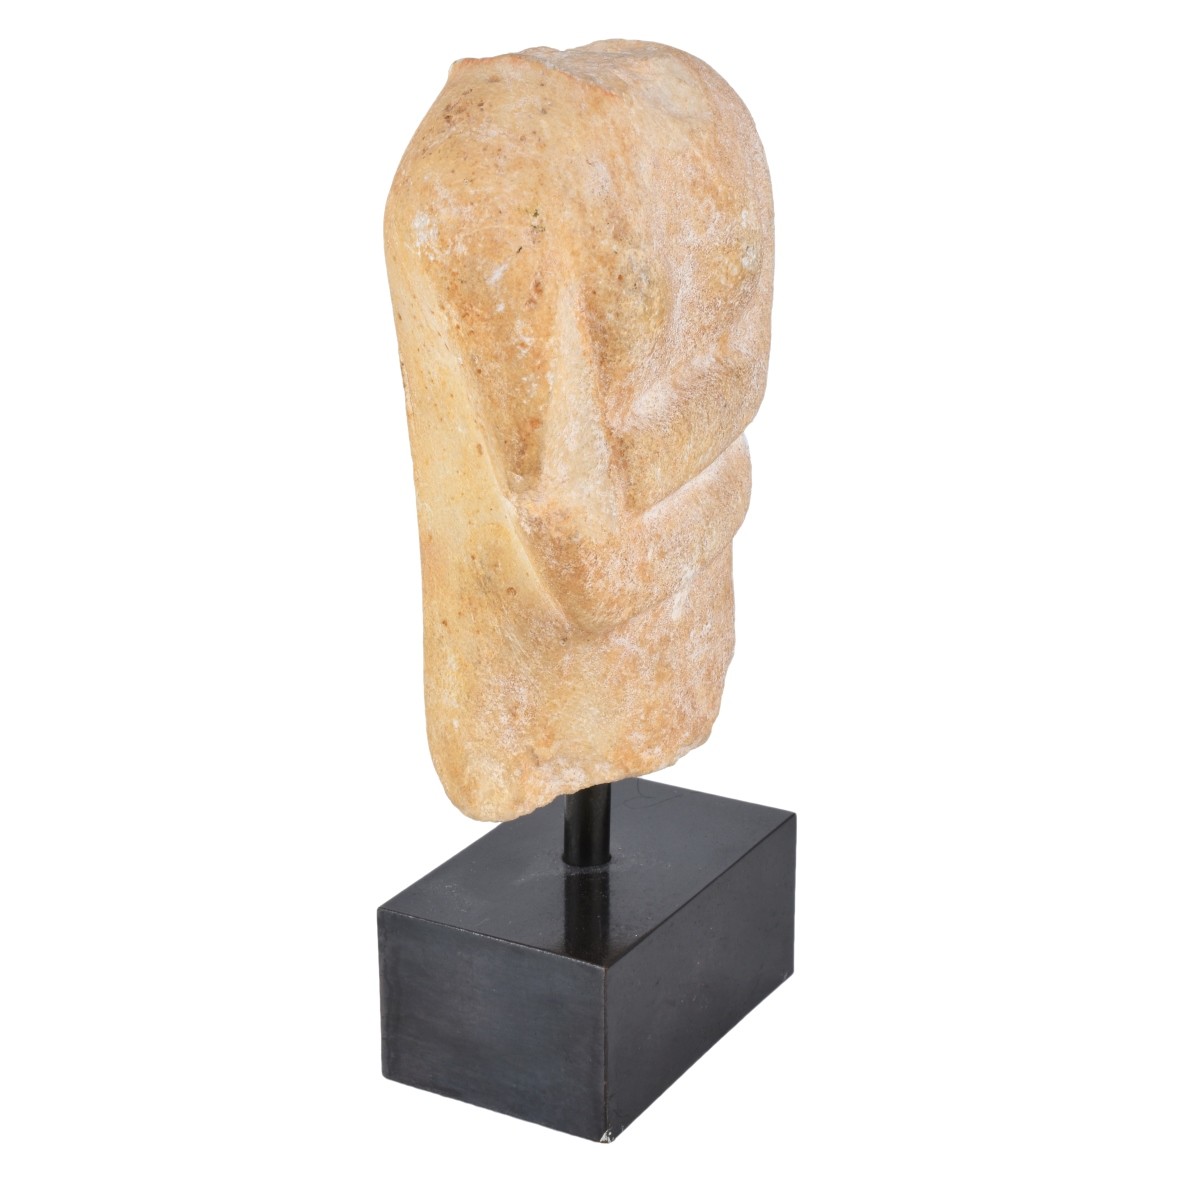 A Cycladic Marble Torso Mounted on Marble Stand